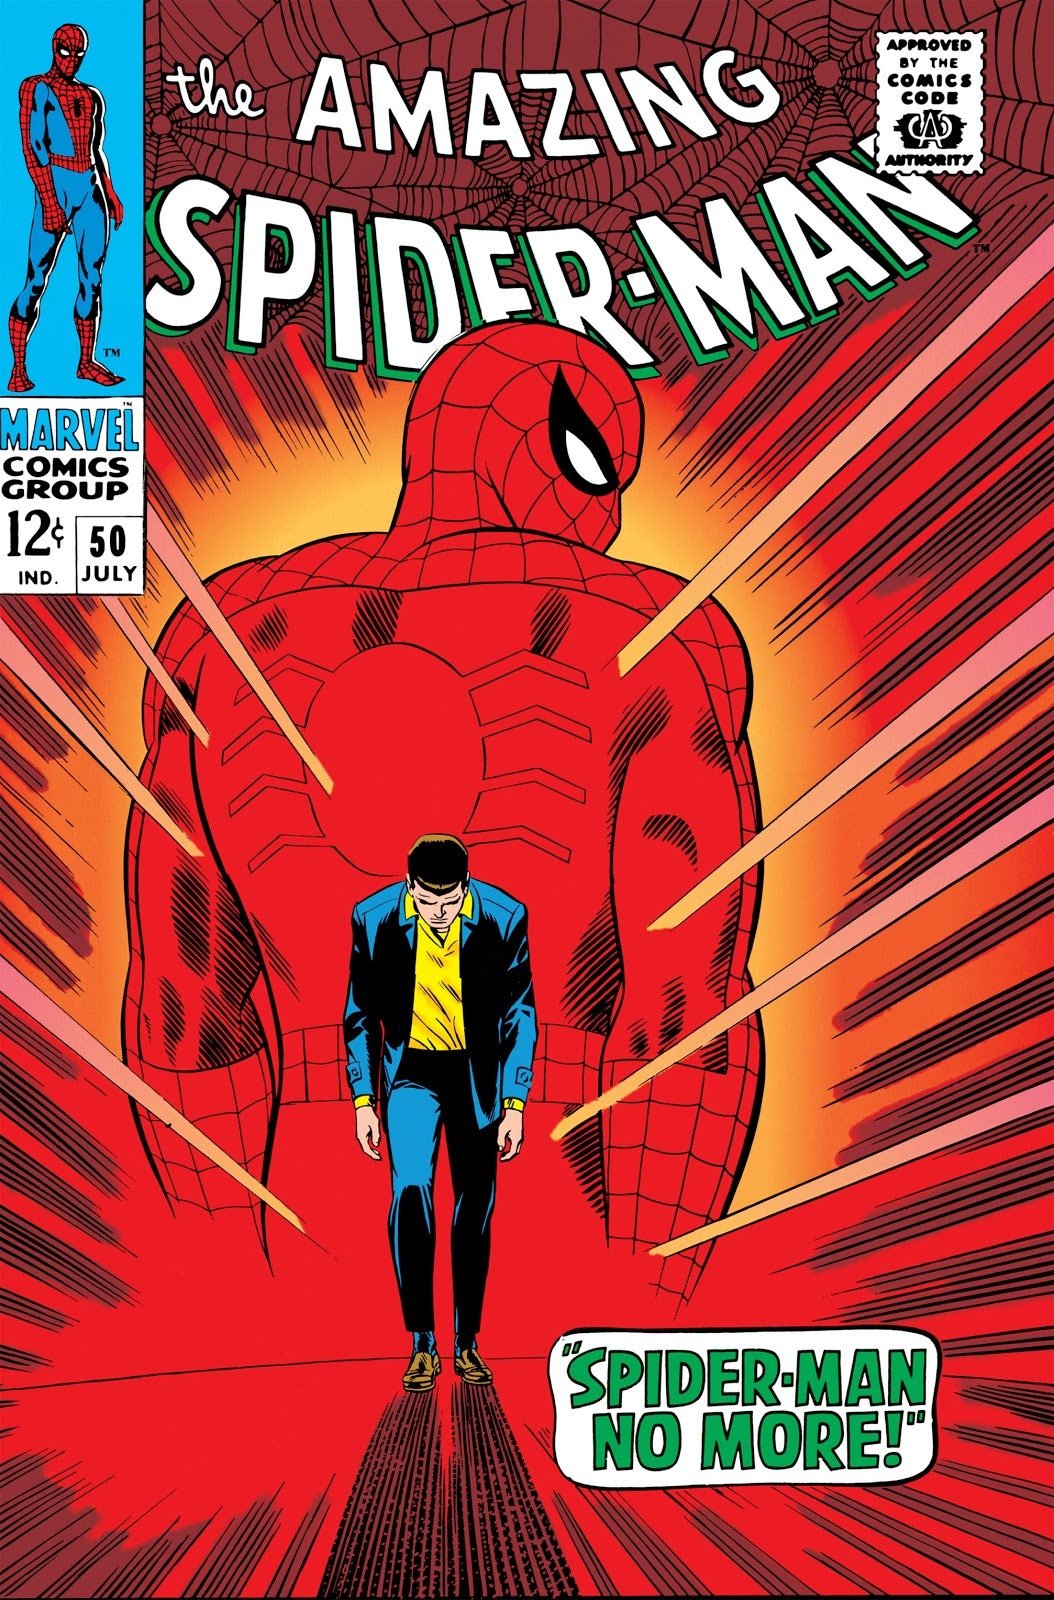 The Best of Stan Lee’s Marvel Comic Books